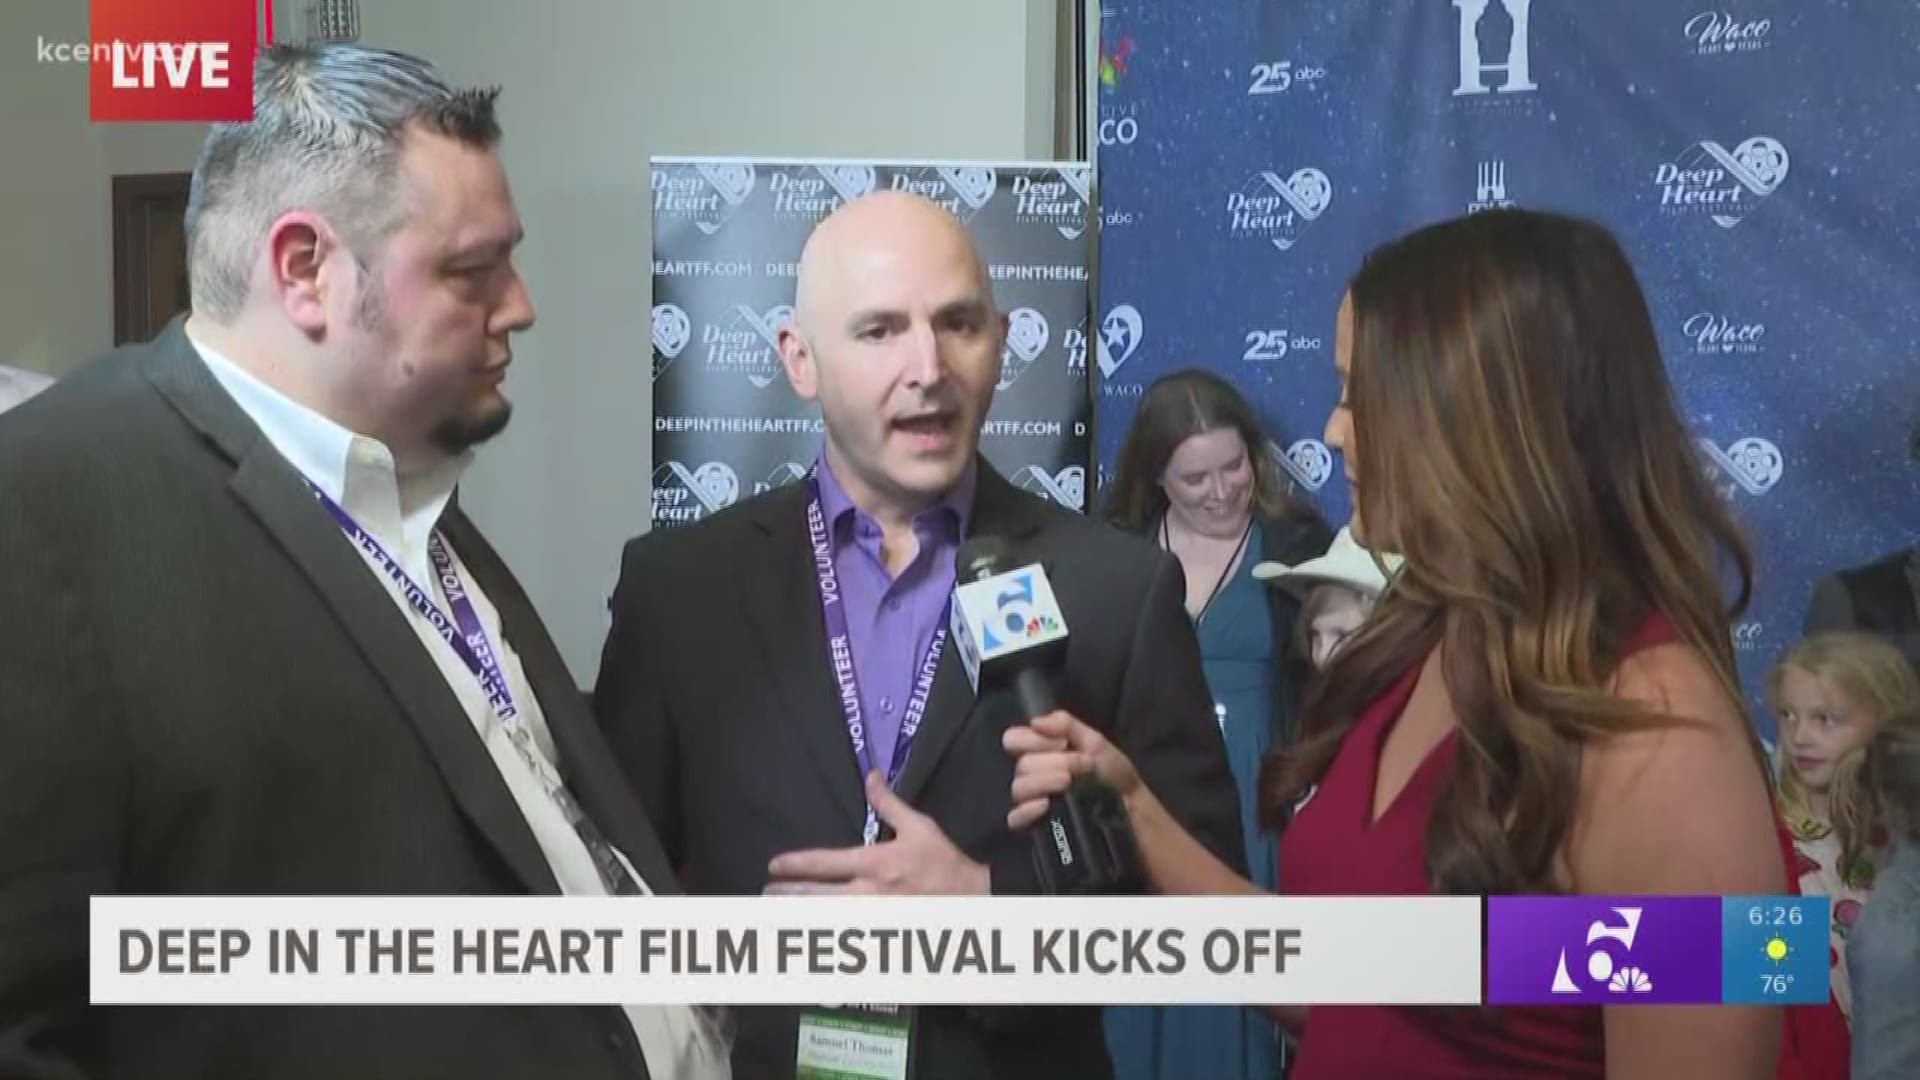 Evening anchor Leslie Draffin interviewed the "Deep in the Heart" Film Festival organizers on the festival's opening night.